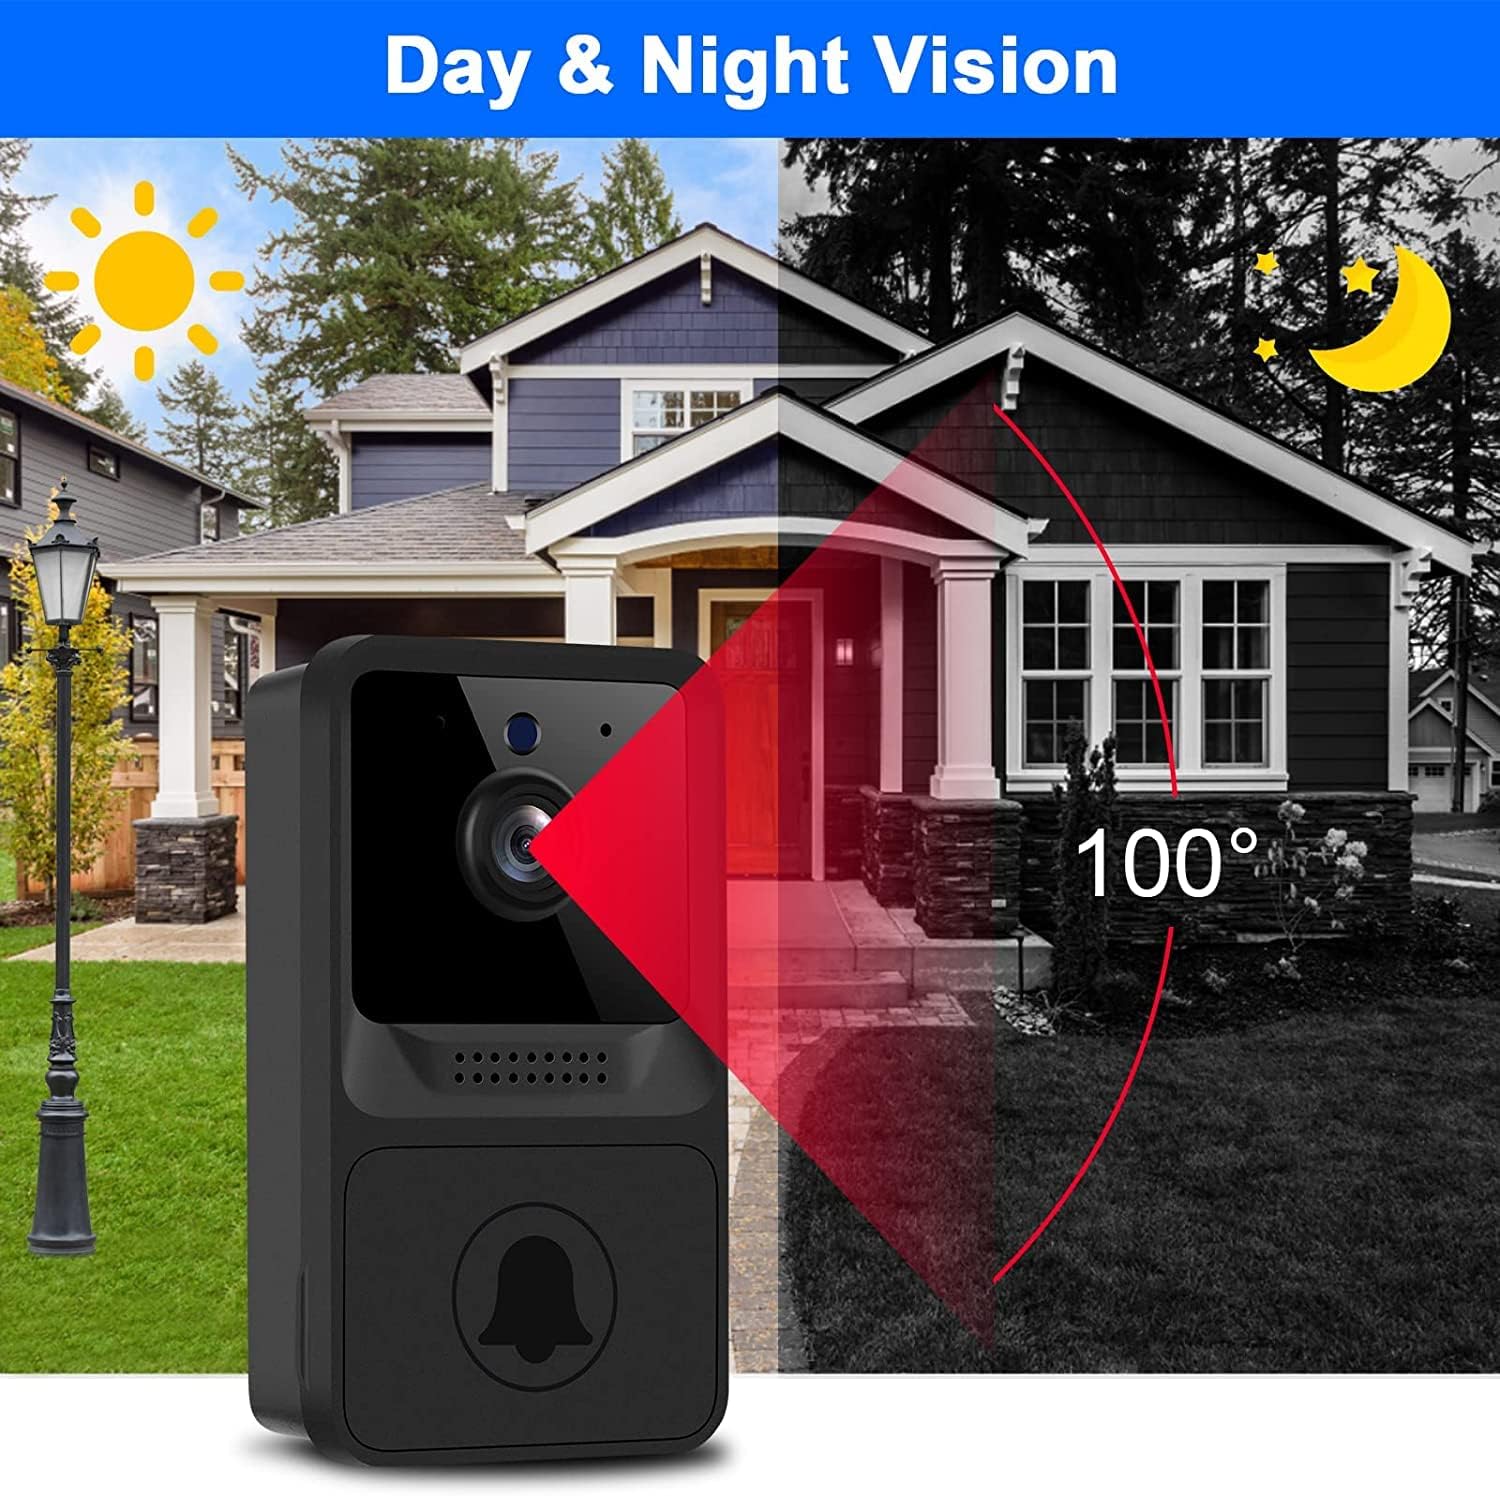 Smart Doorbell Wireless Doorbell Camera 2.5G WiFi Video Doorbell with Chime,Home Security Camera Doorbell ，Free Cloud Storage Rechargeable Battery Real-time Alerts Night Vision